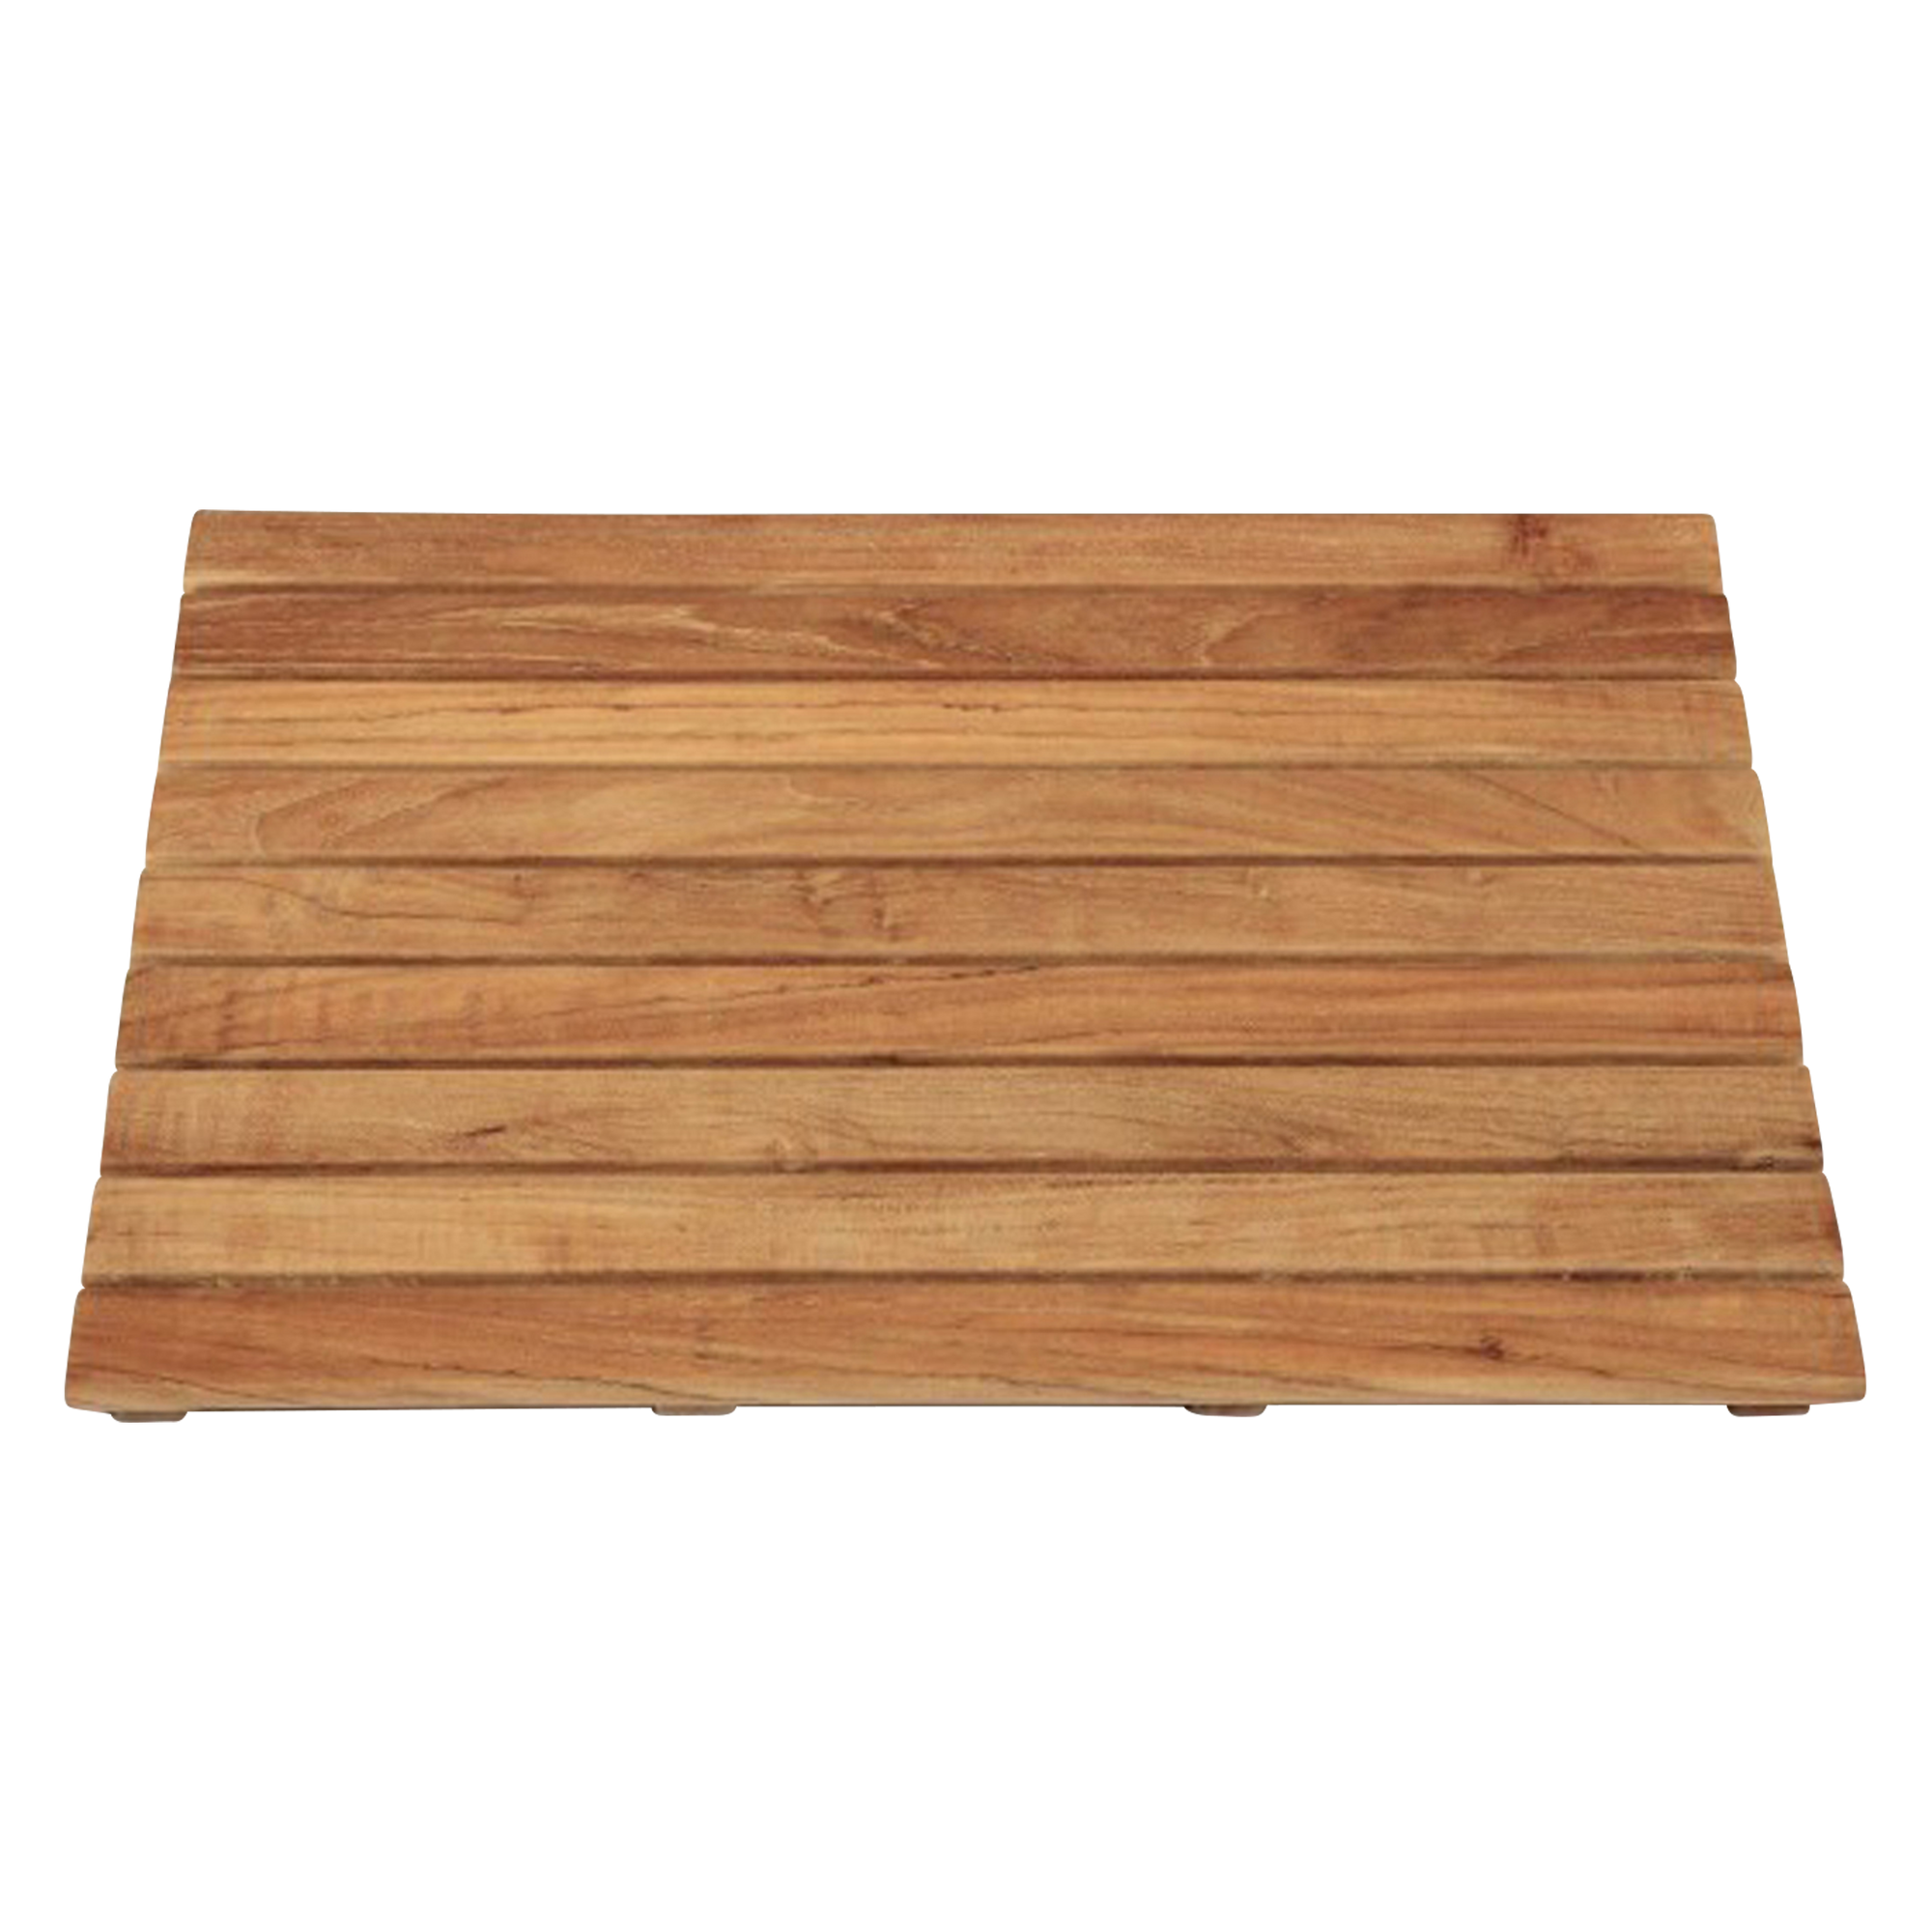 The Teak bathmat may be used inside or outside the shower.